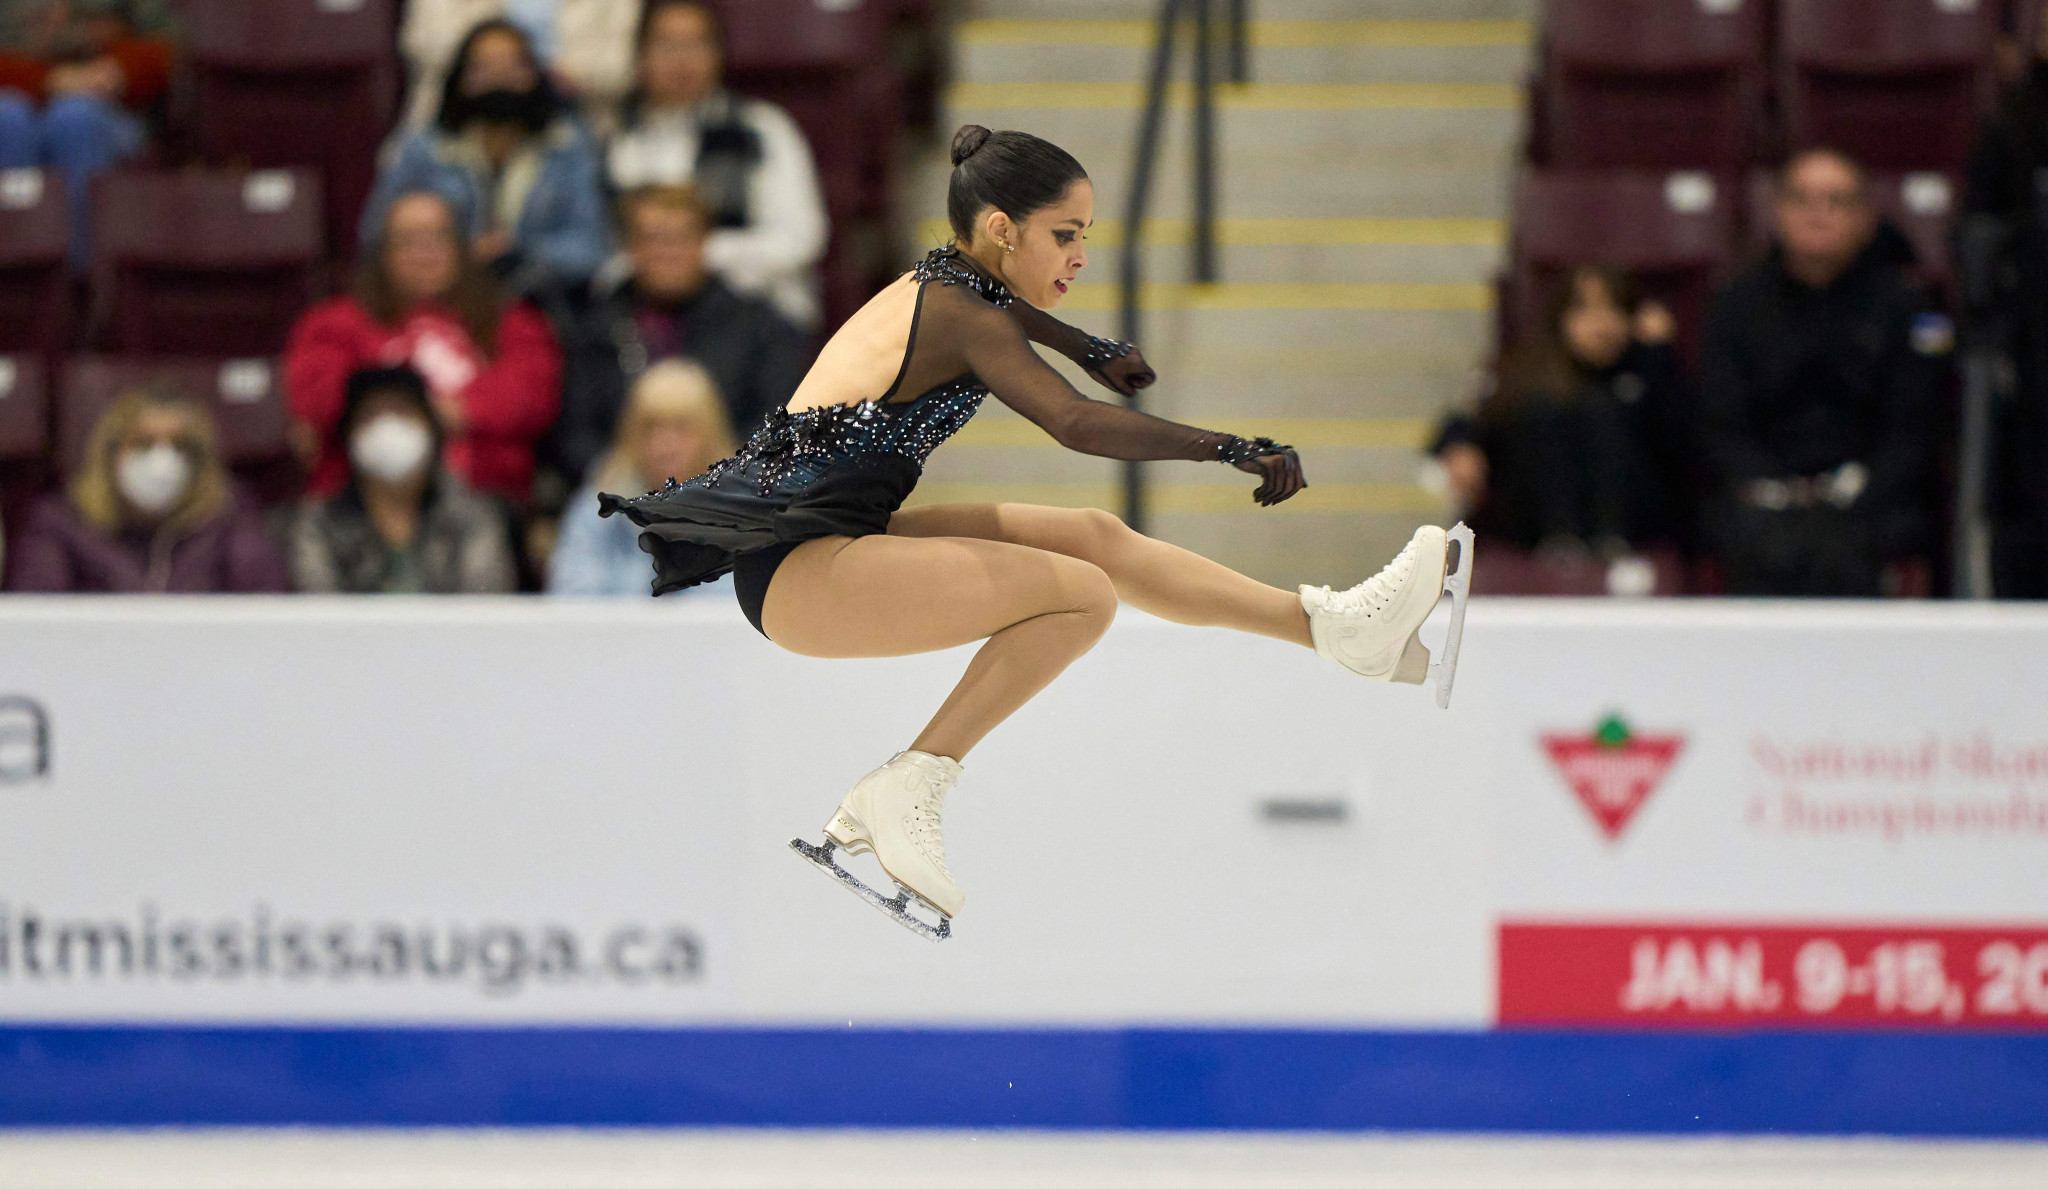 Madeline Schizas leads the women's contest at Skate Canada following the short programme ©Getty Images